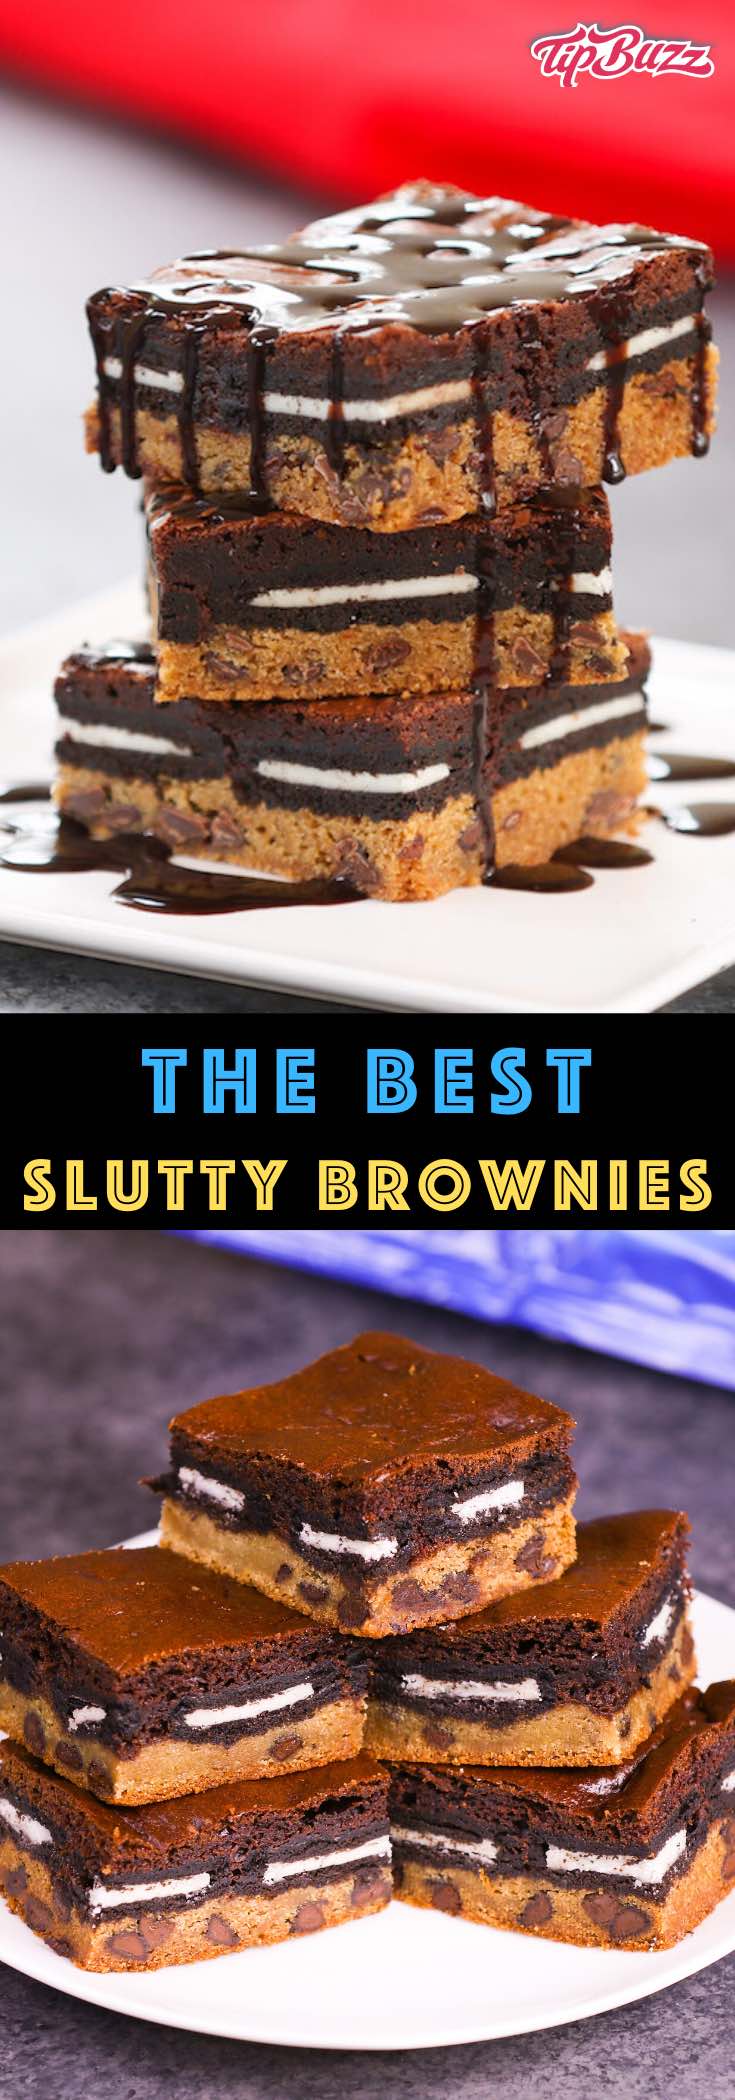 These Slutty Brownies melt in your mouth with rich layers of cookie dough, Oreo cookies and brownies. This slutty brownie recipe is easy to make whenever you want an extra-decadent treat! #SluttyBrownies